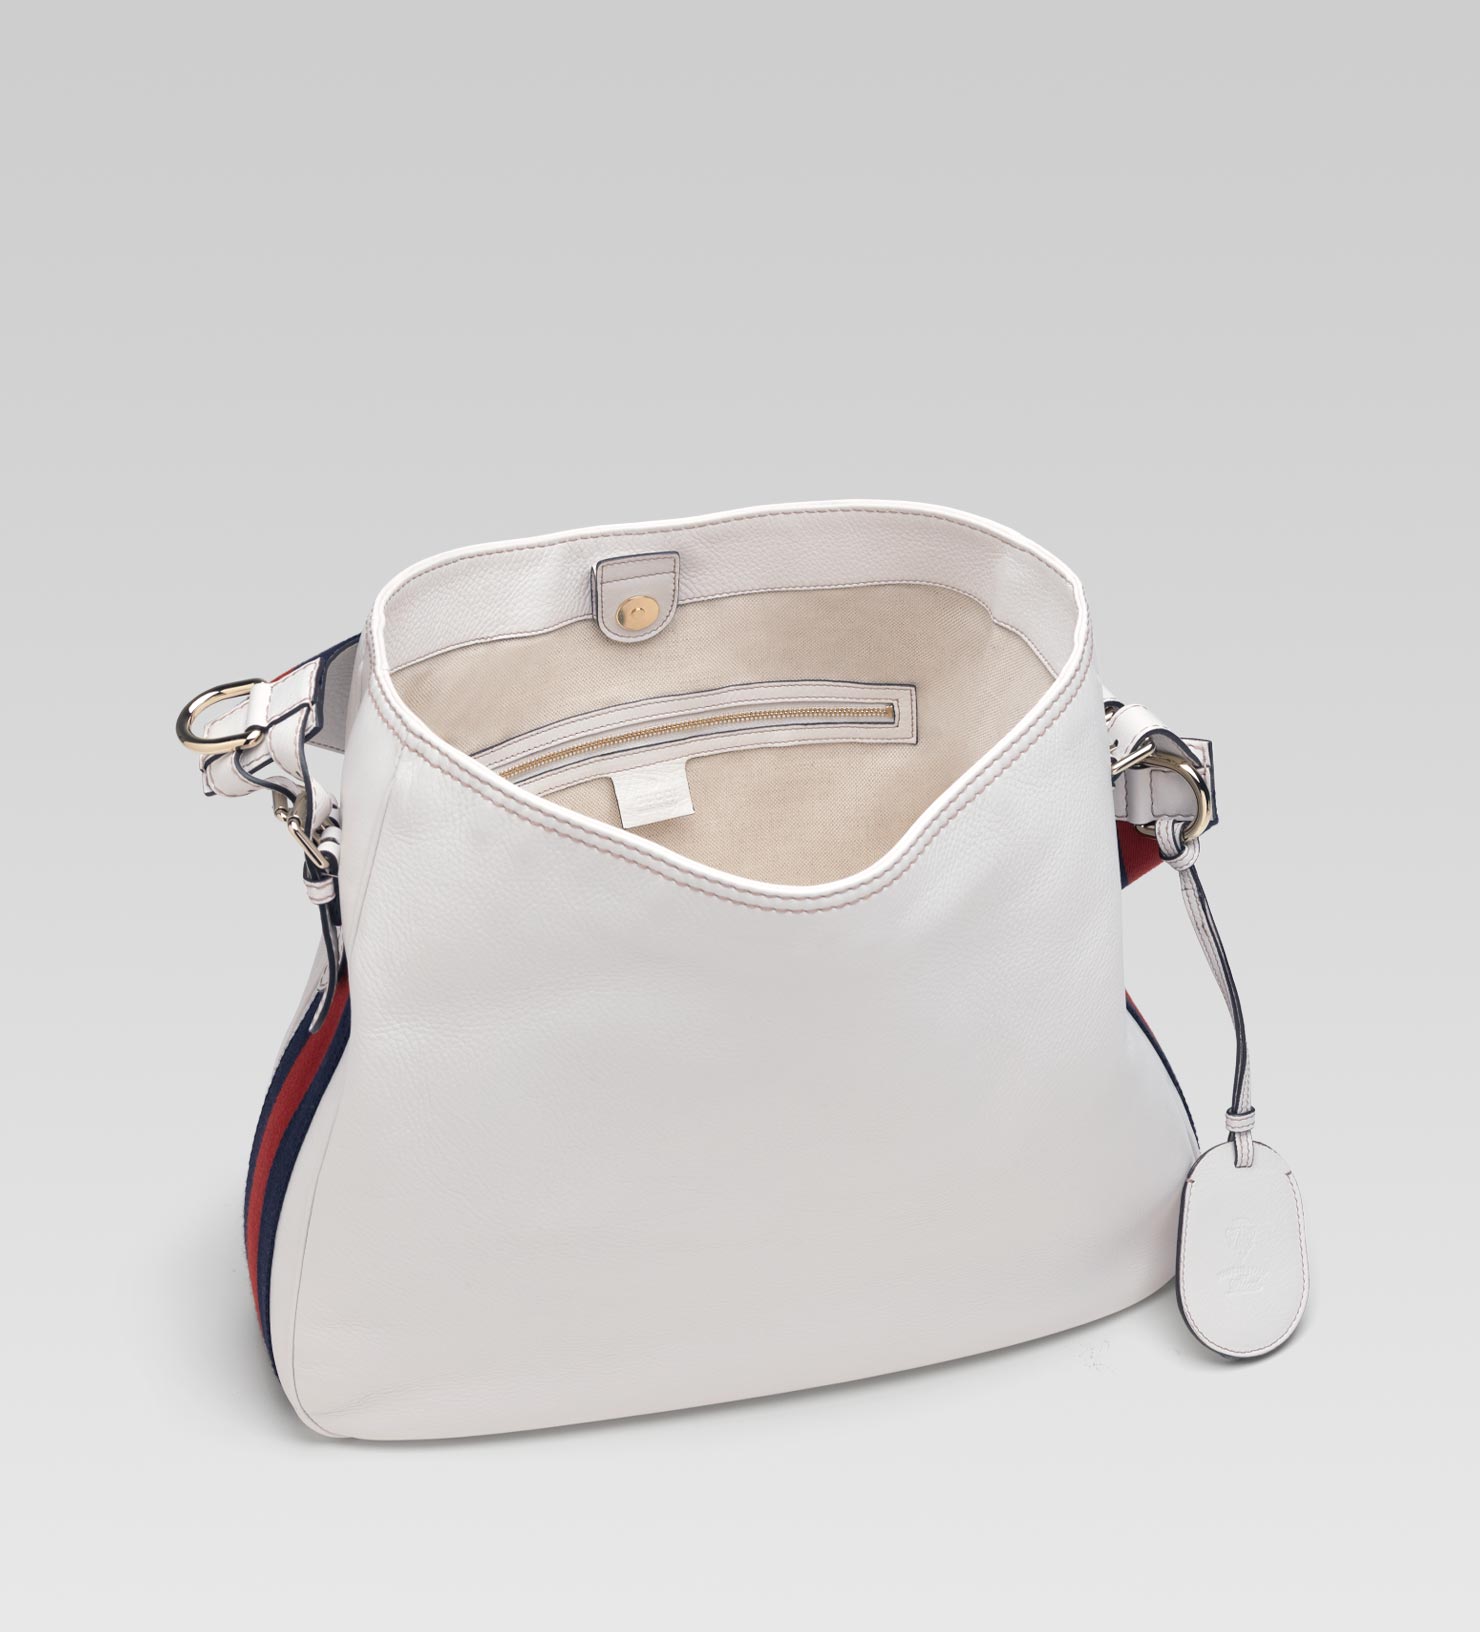 Gucci Gucci Heritage Medium Shoulder Bag with Web Detail in White | Lyst